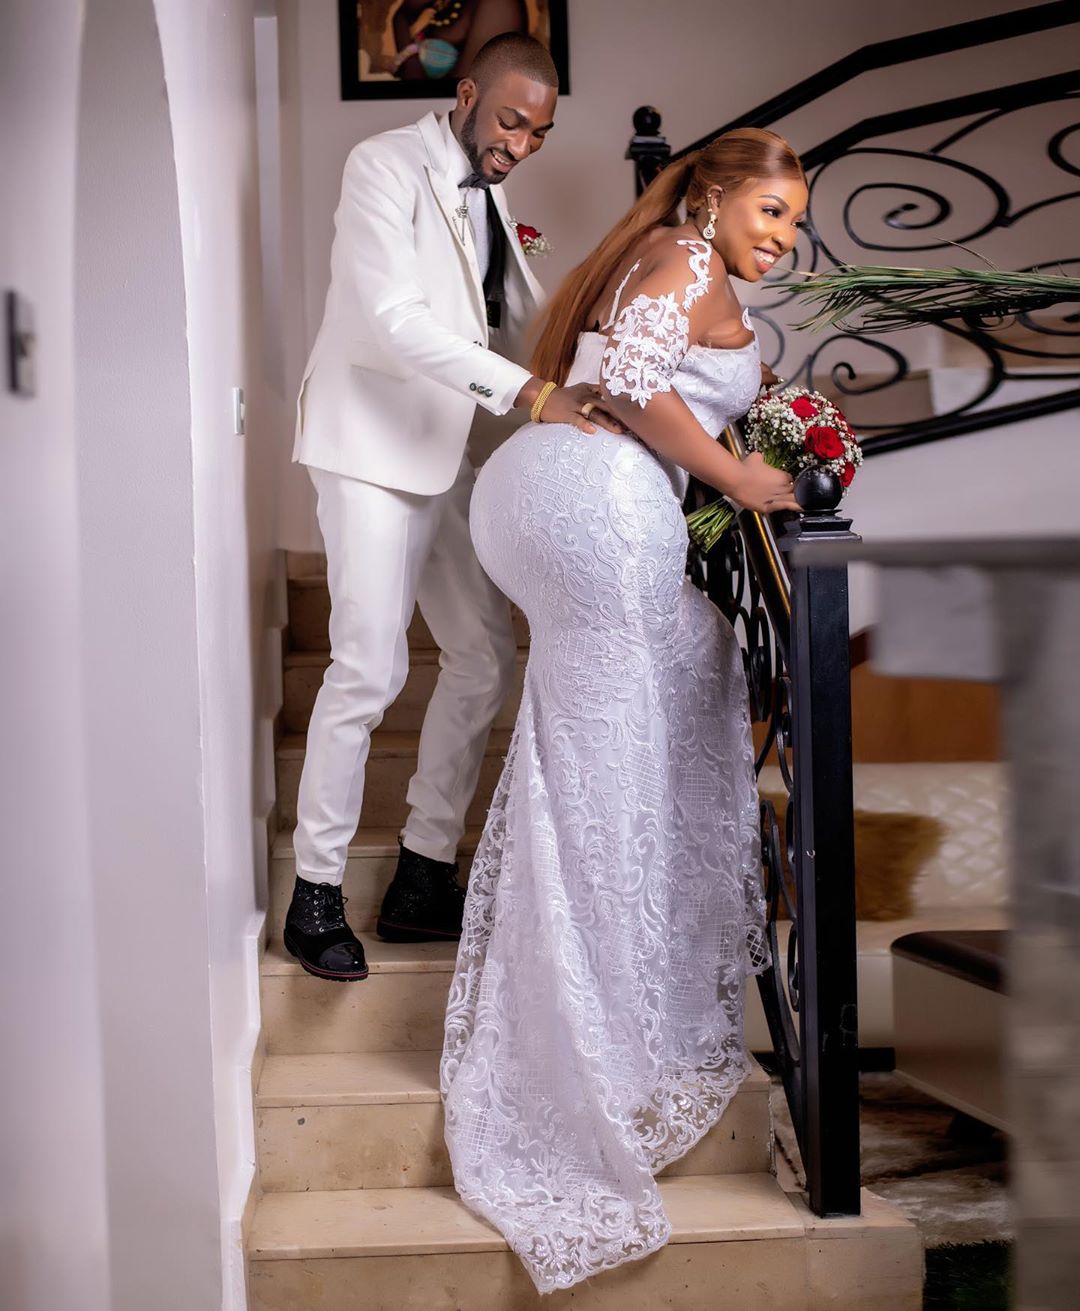 They said he’s not my type, yet we got married’ – Anita Joseph to those mocking her choice of husband (Photos)